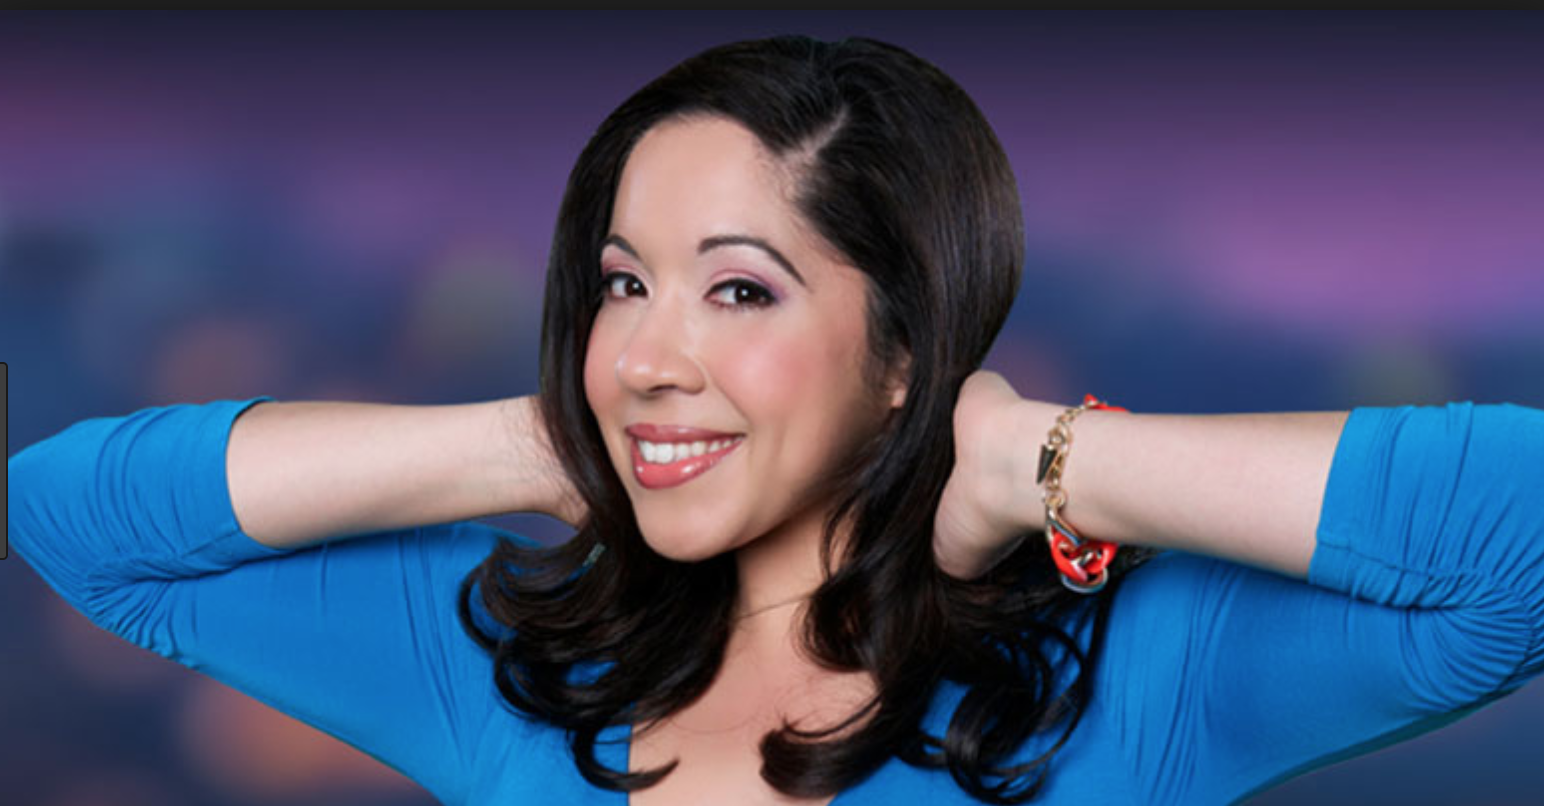 Podcast - Episode 0255 - Using Comedy For Personal Growth with Gina Brillon